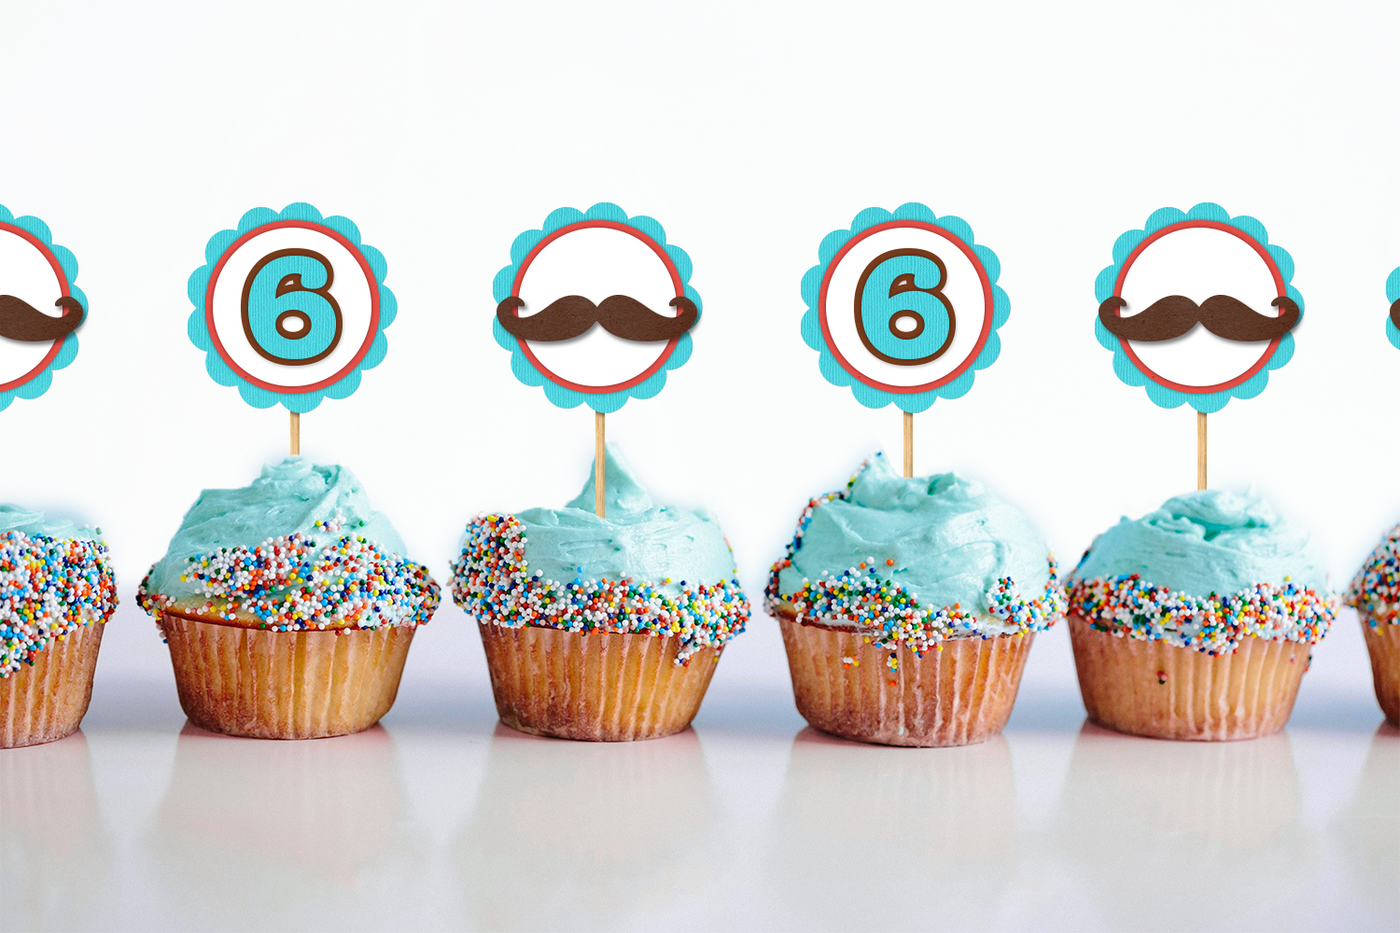 Mustache themed cupcake toppers. Also has matching cupcake toppers with the number 6.